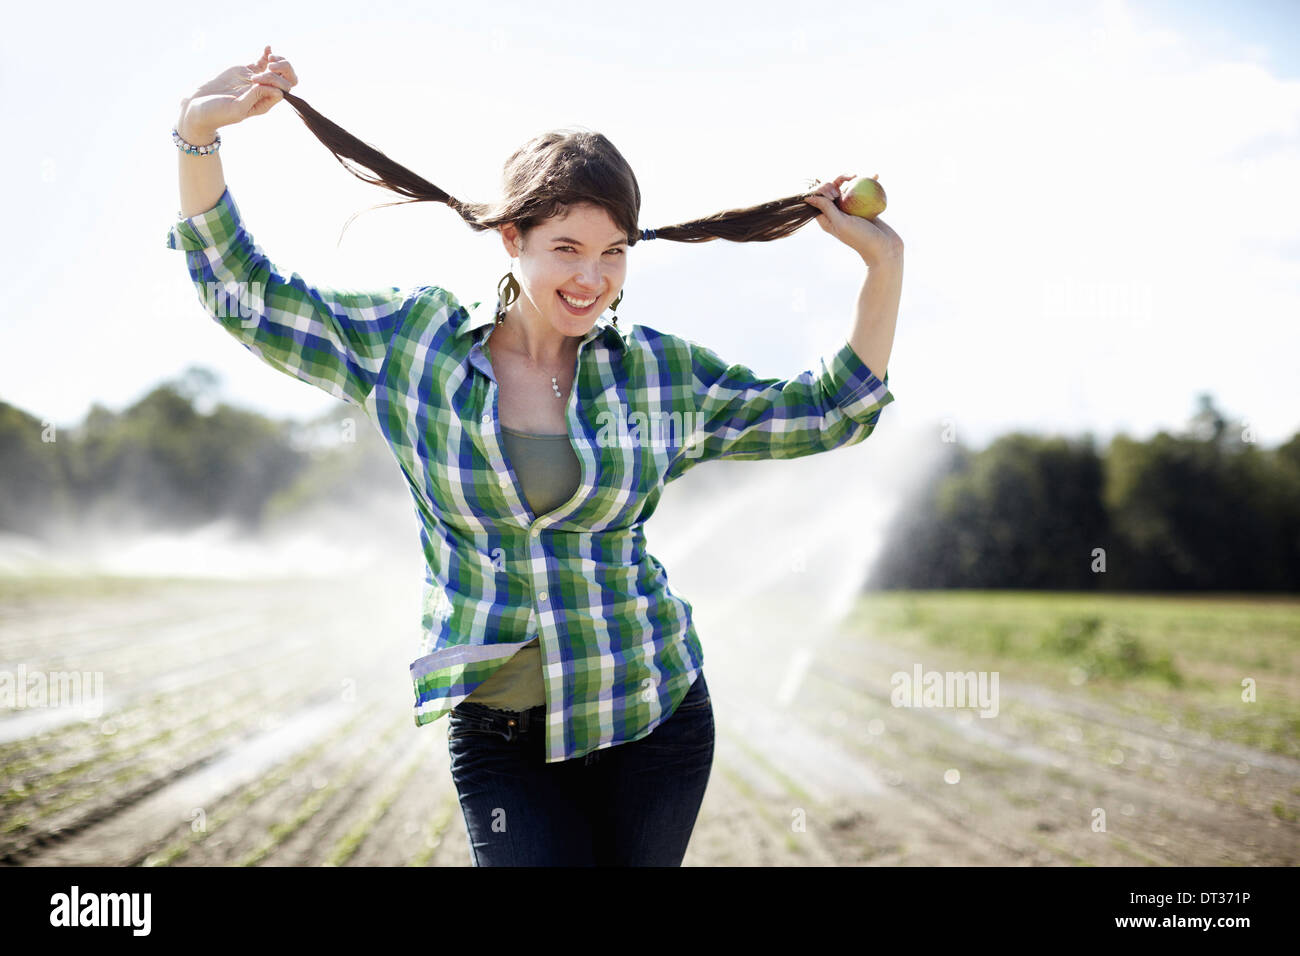 A girl standing in a field irrigation sprinklers working Stock Photo